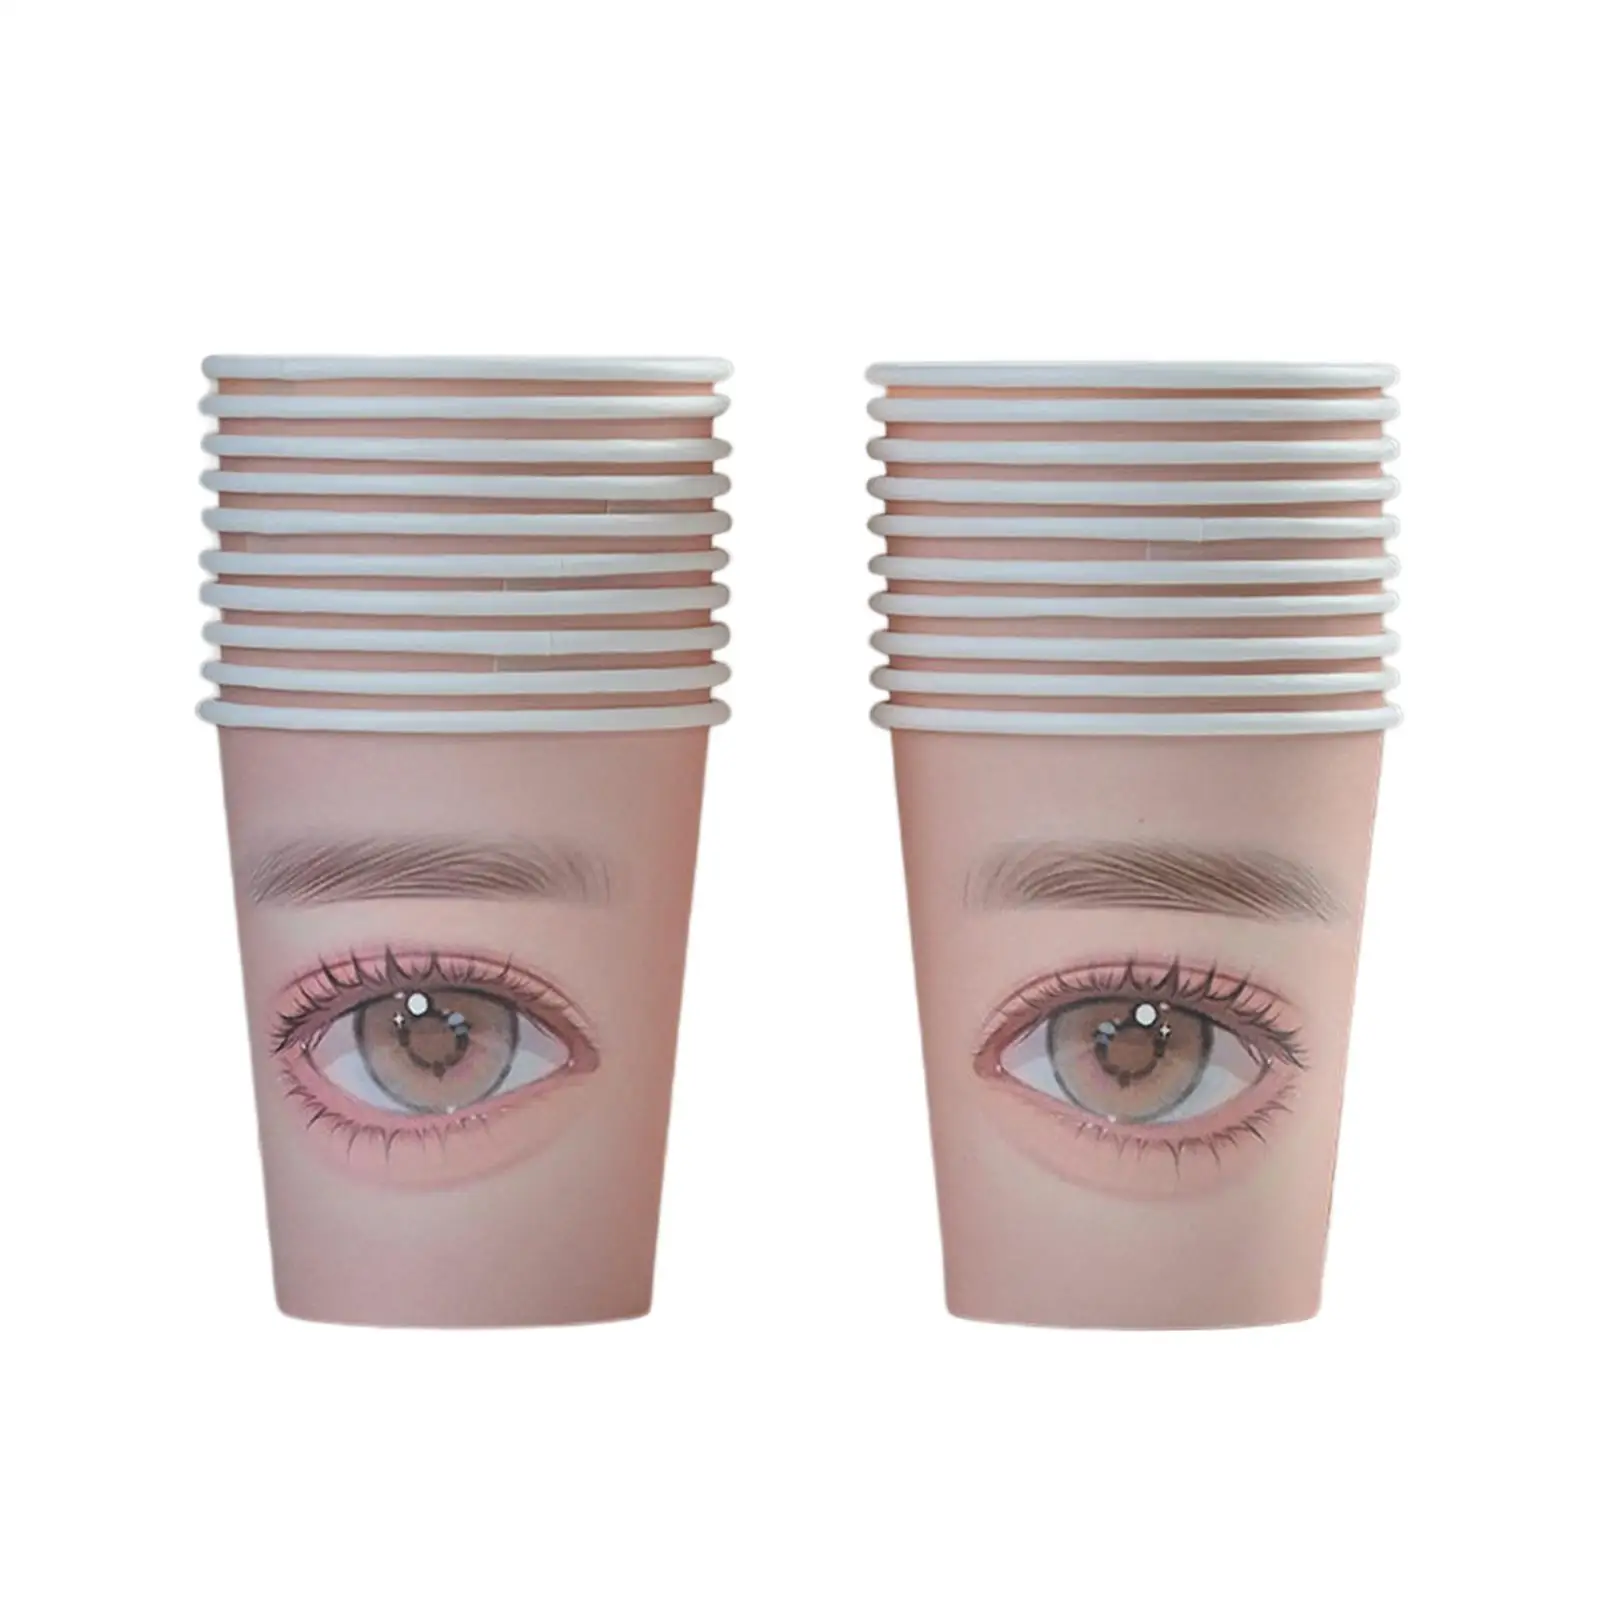 20 Pieces Eyelash Practice Paper Cup Exercises Upgraded Cosmetology Multifunction Makeup for Starters Teaching Aid Training Tool